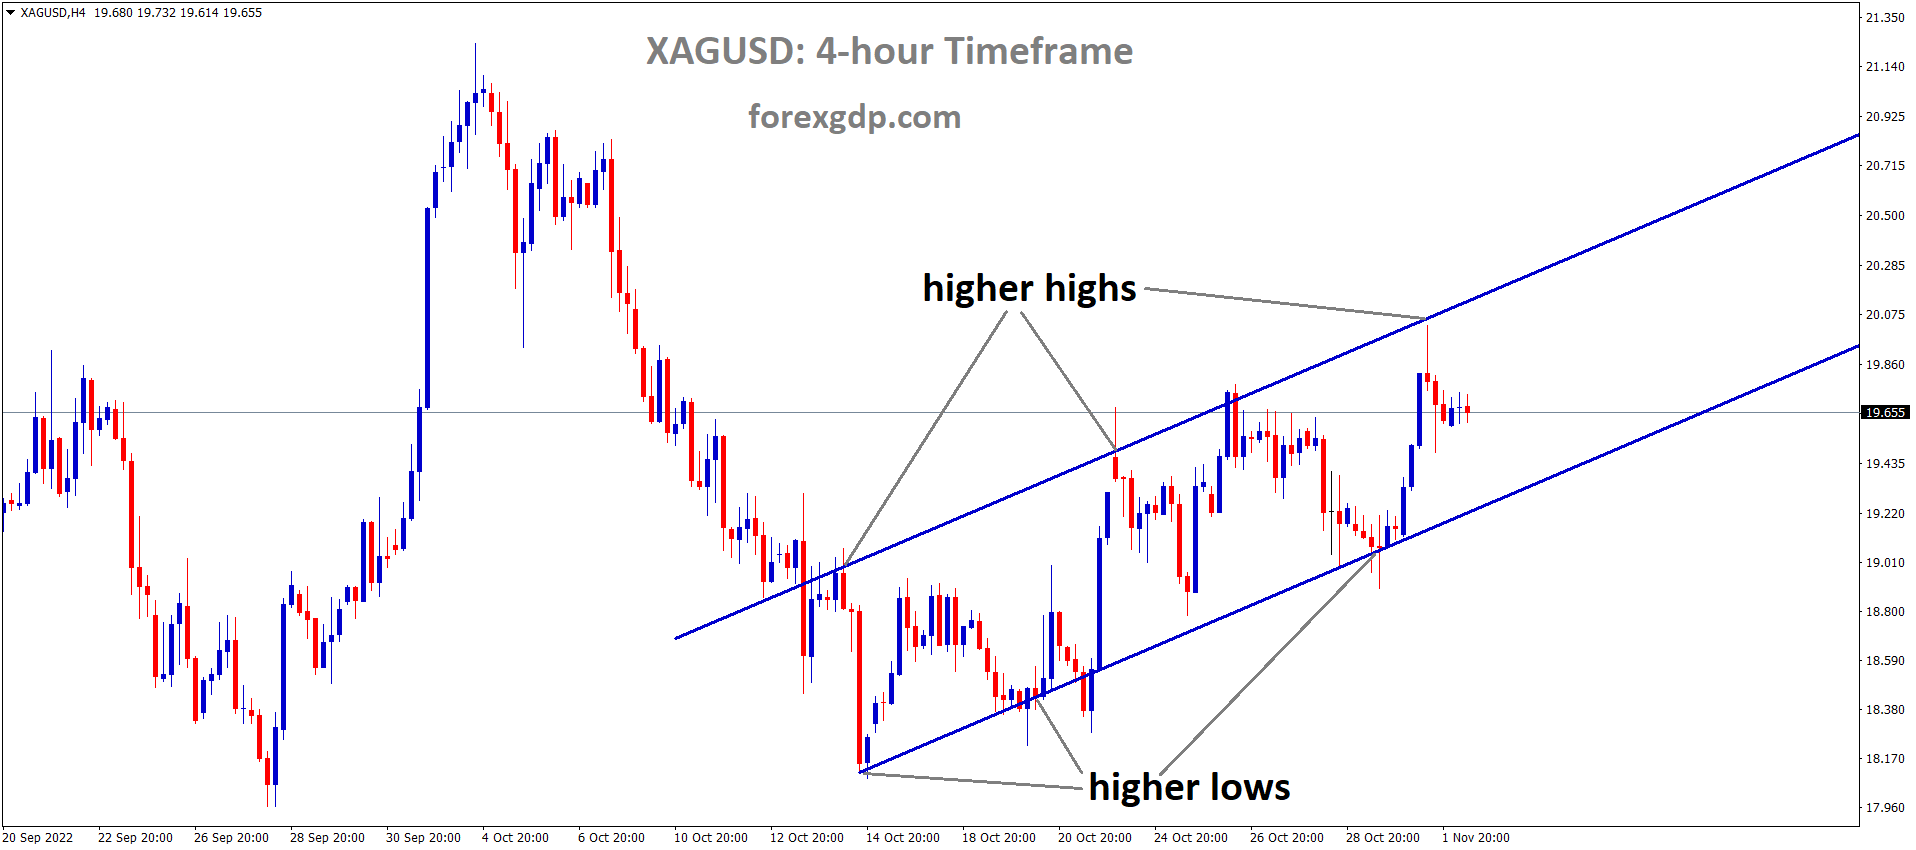 XAGUSD Silver price is moving in an Ascending channel and the market has fallen from the higher high area of the channel